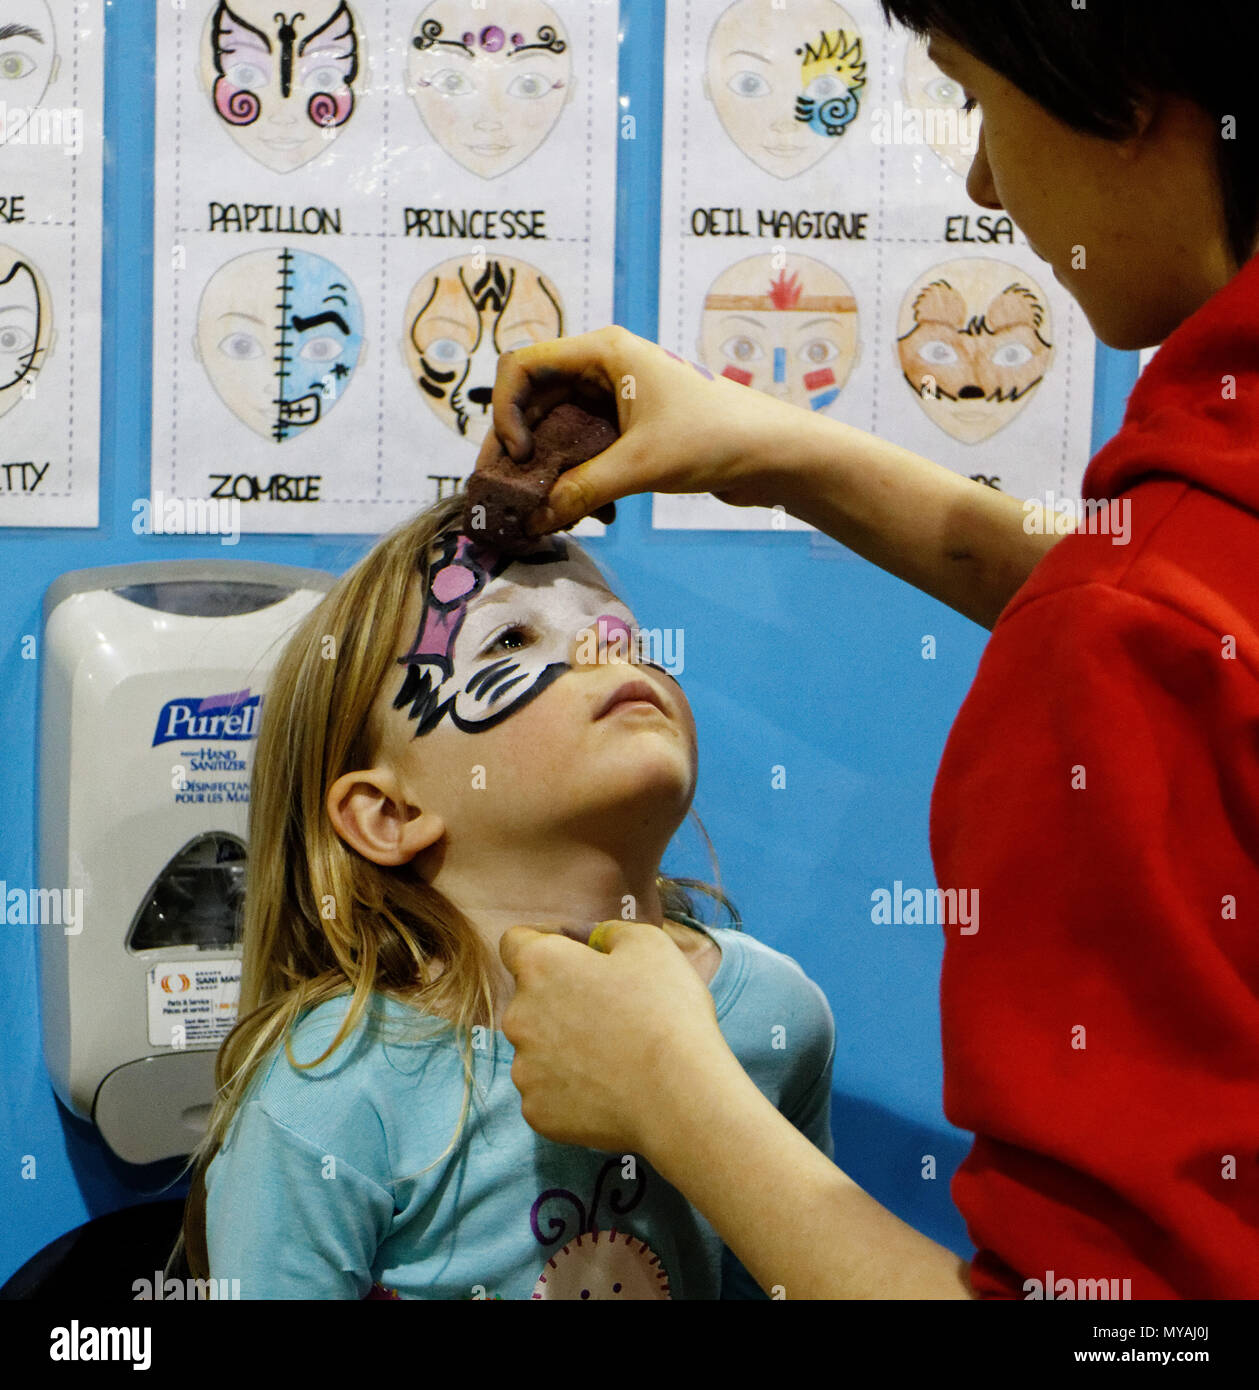 A woman face painting a little girl (3 yr old) as Hello Kitty at a children's party Stock Photo